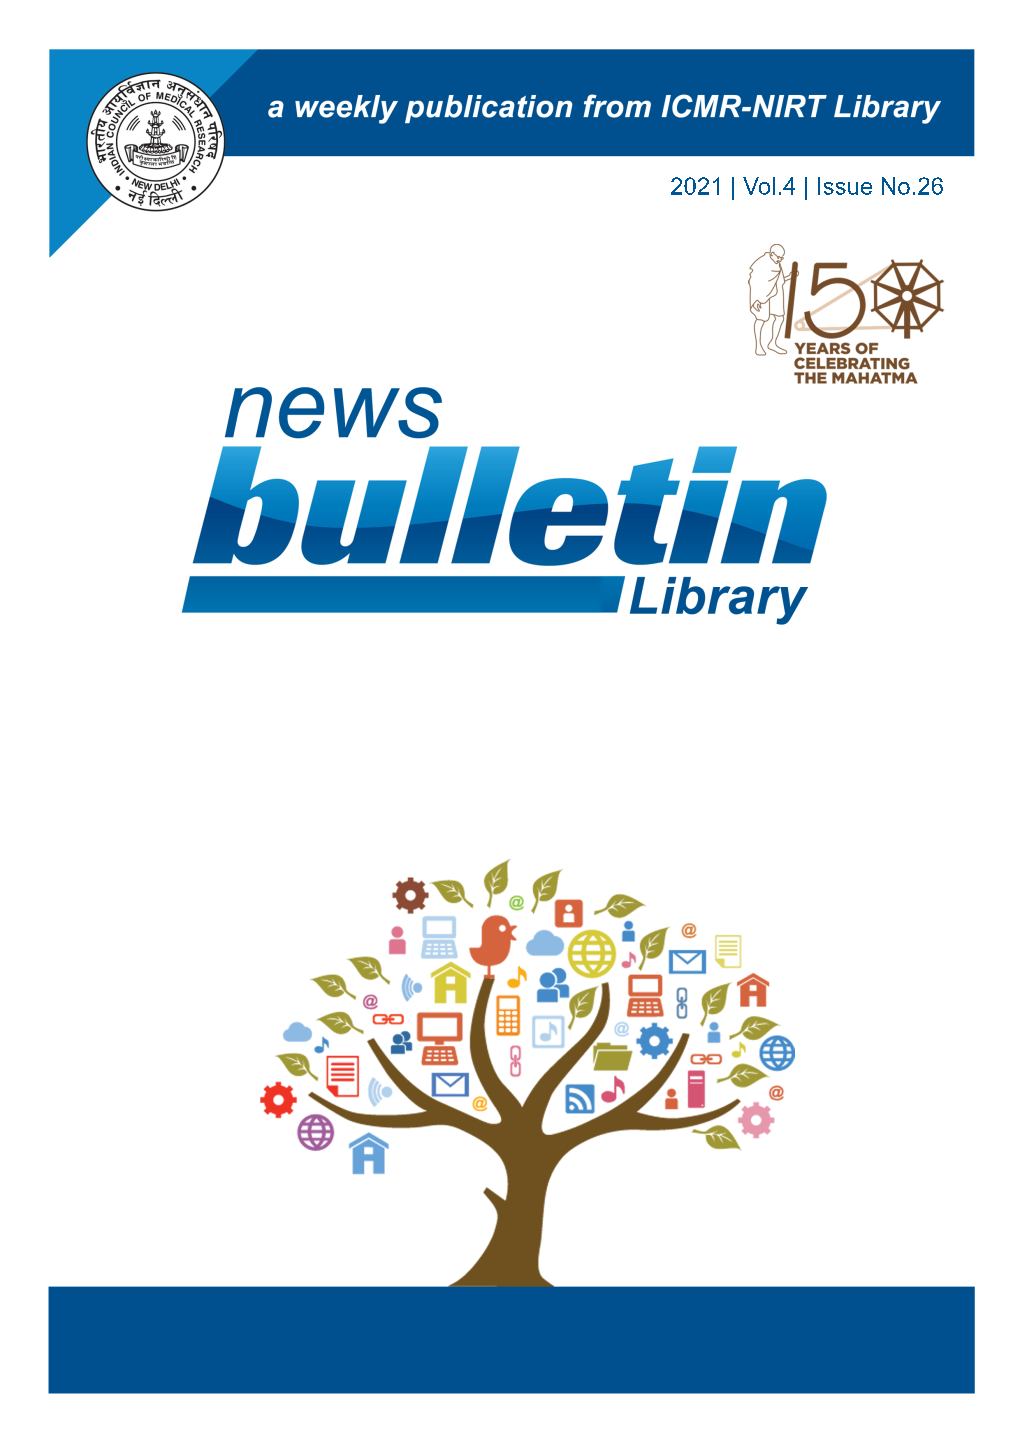 NEWS BULLETIN a Weekly Publication from NIRT Library